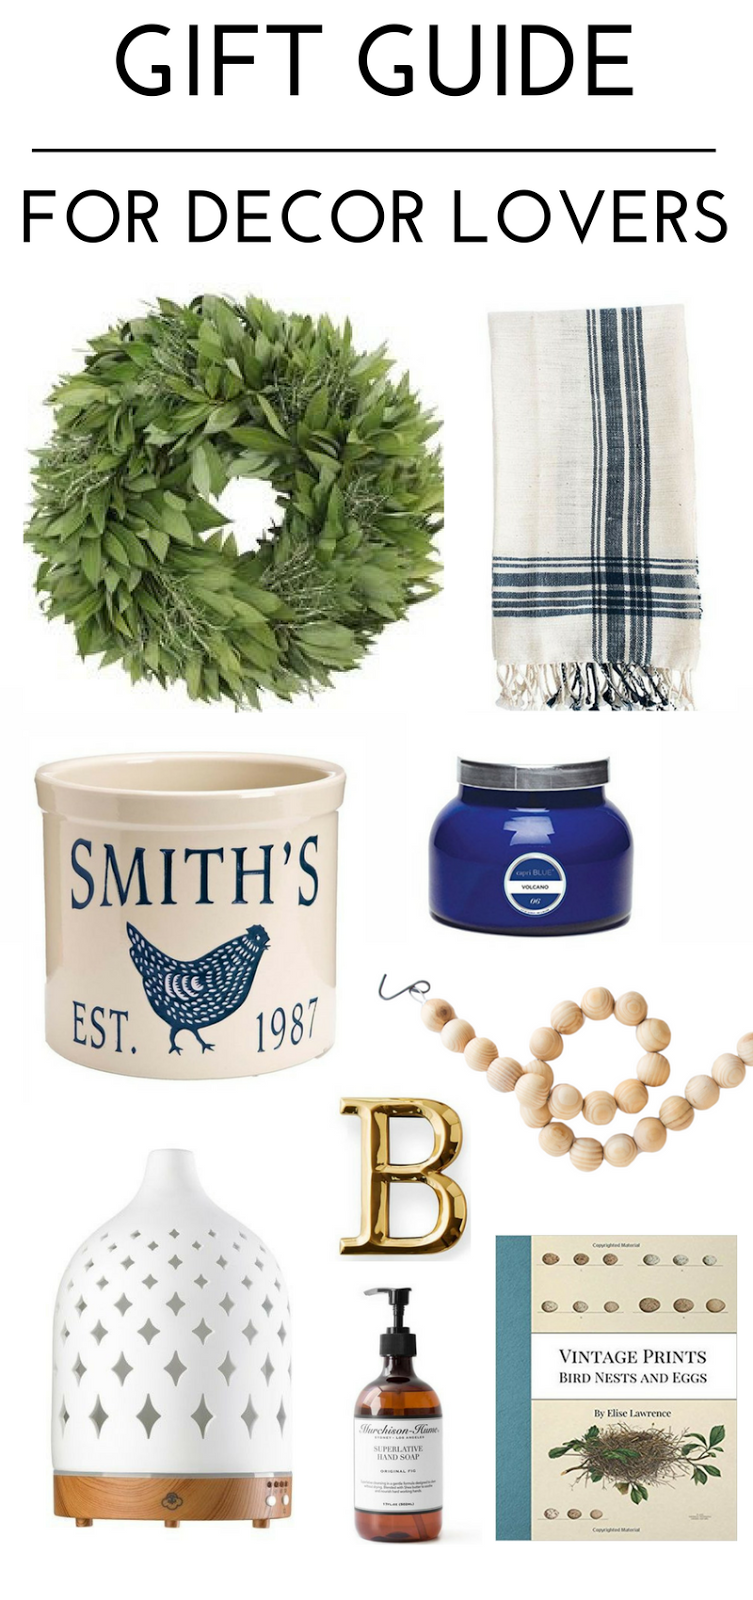 The ultimate gift guide for decorators #giftguide #homedecor